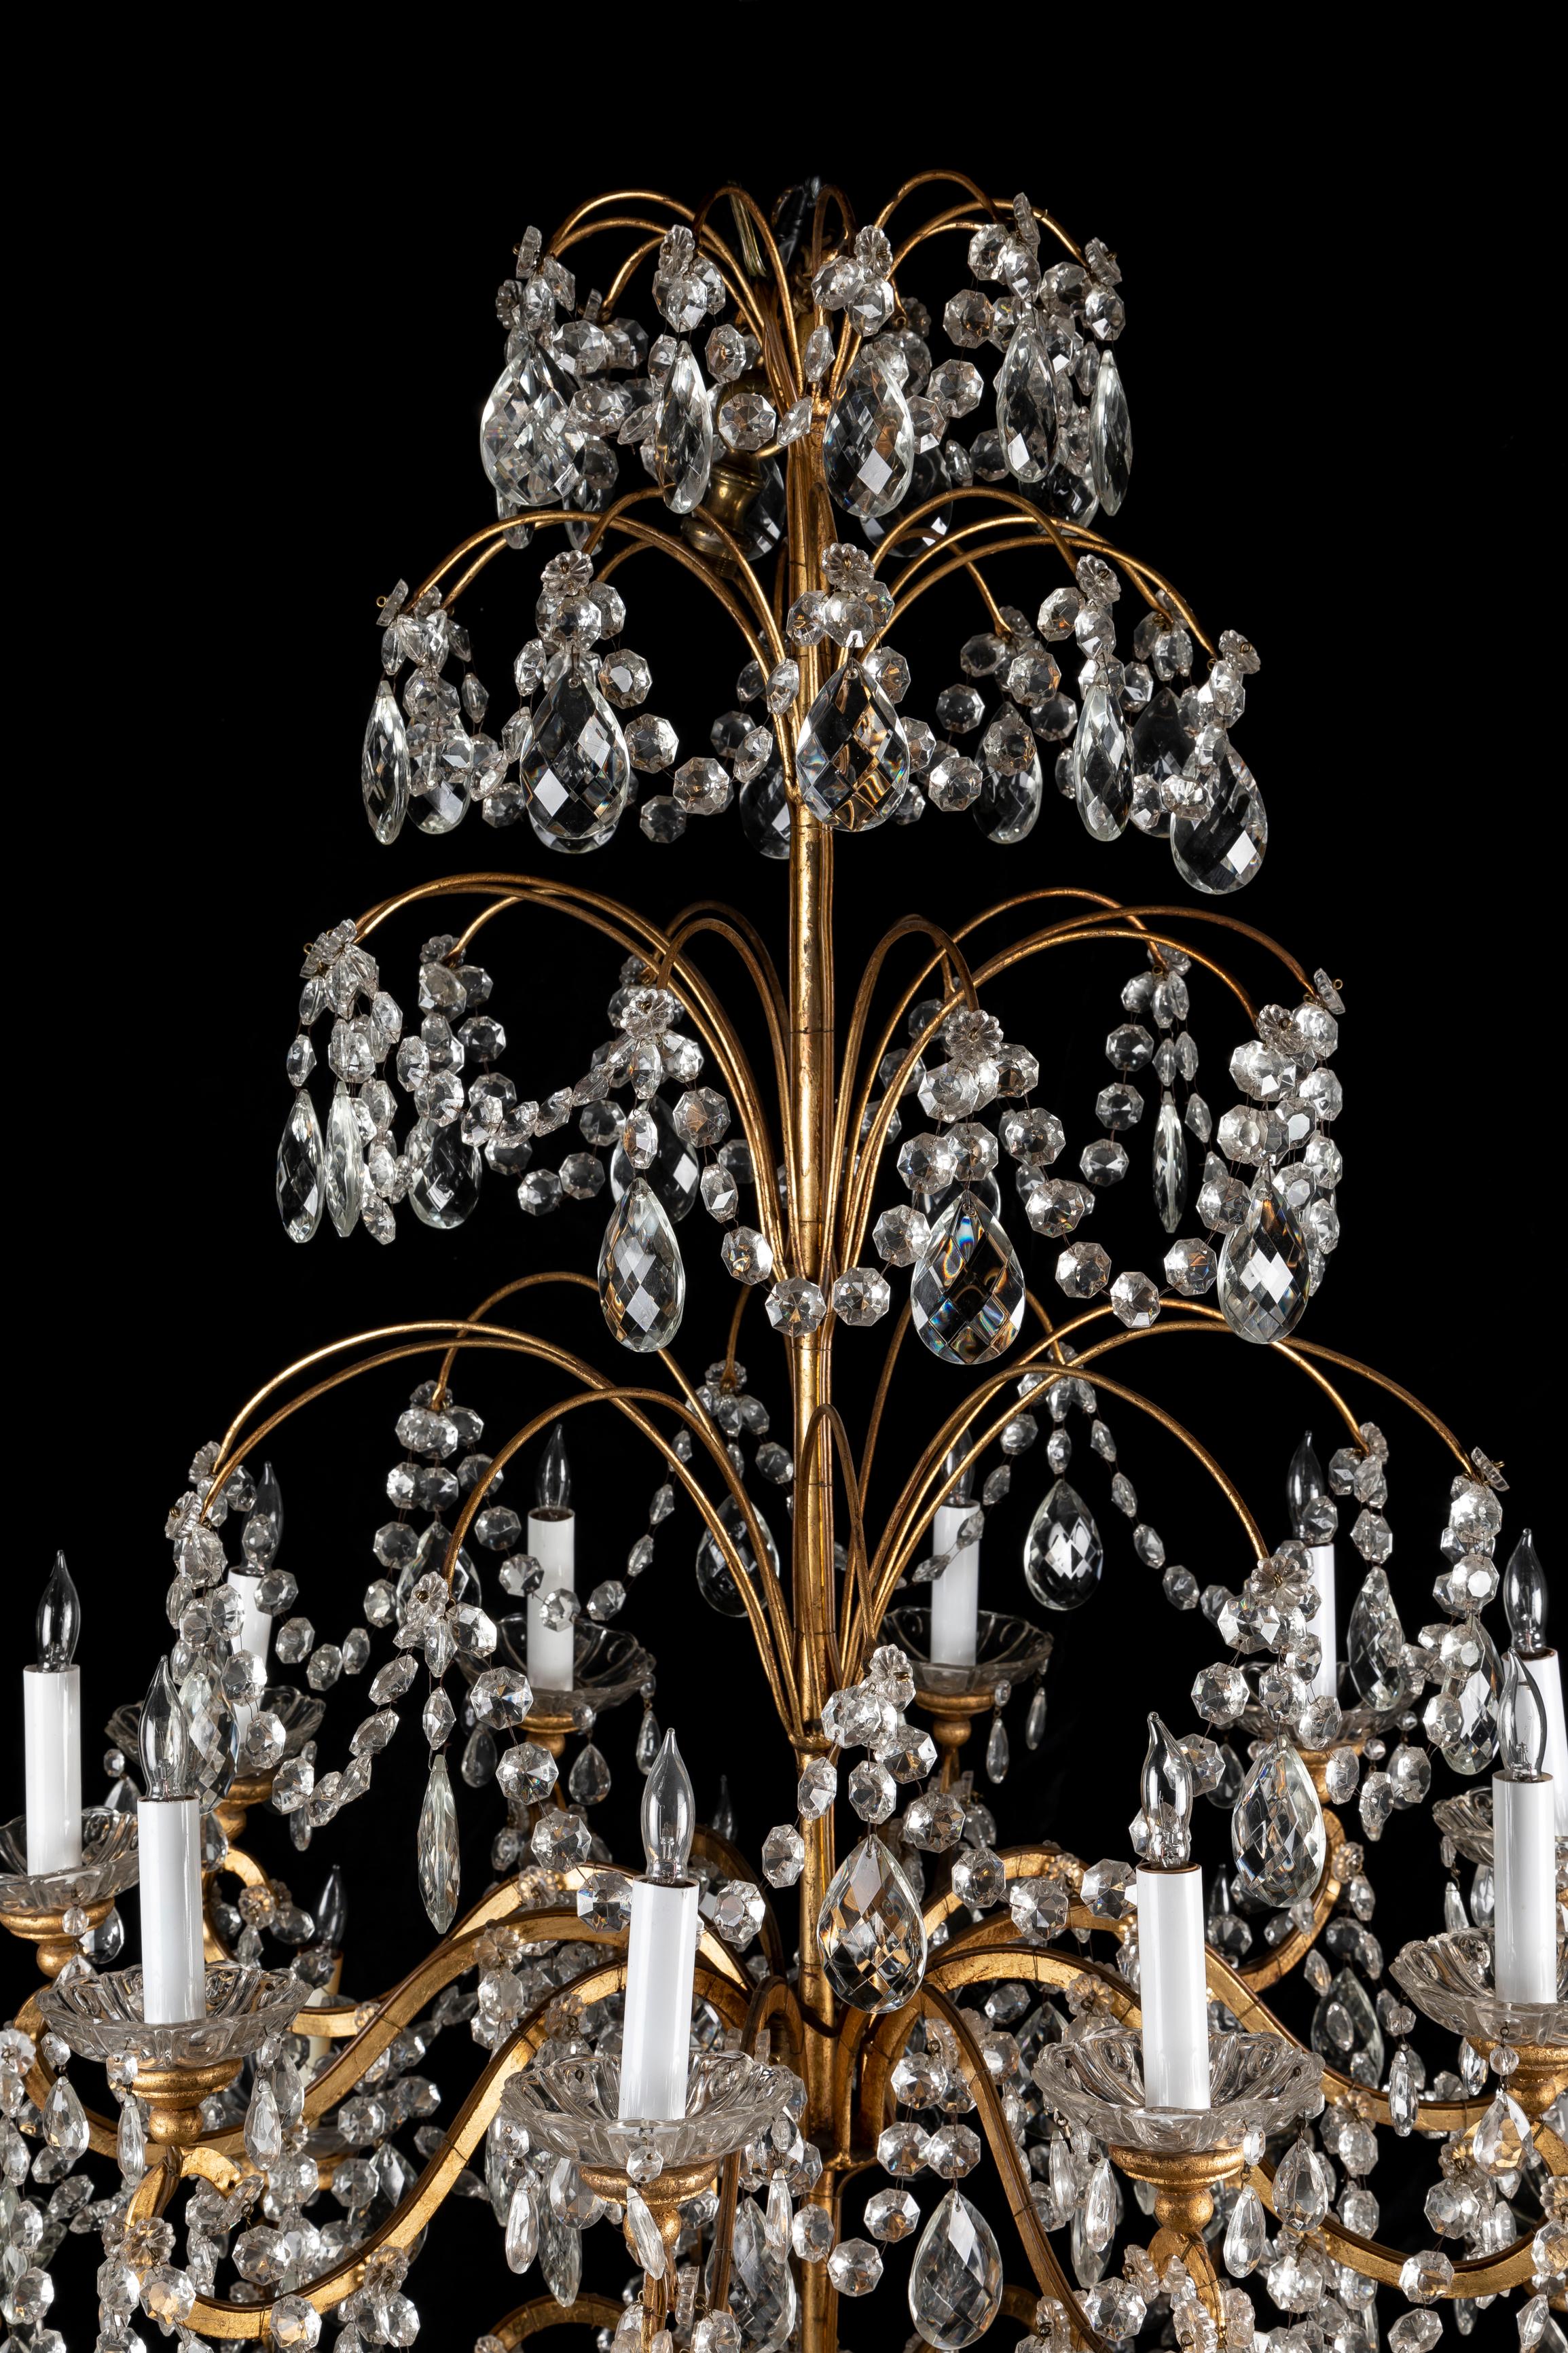  Pair of Large Antique French Louis XVI Style Gilt Bronze & Crystal Chandeliers  For Sale 1